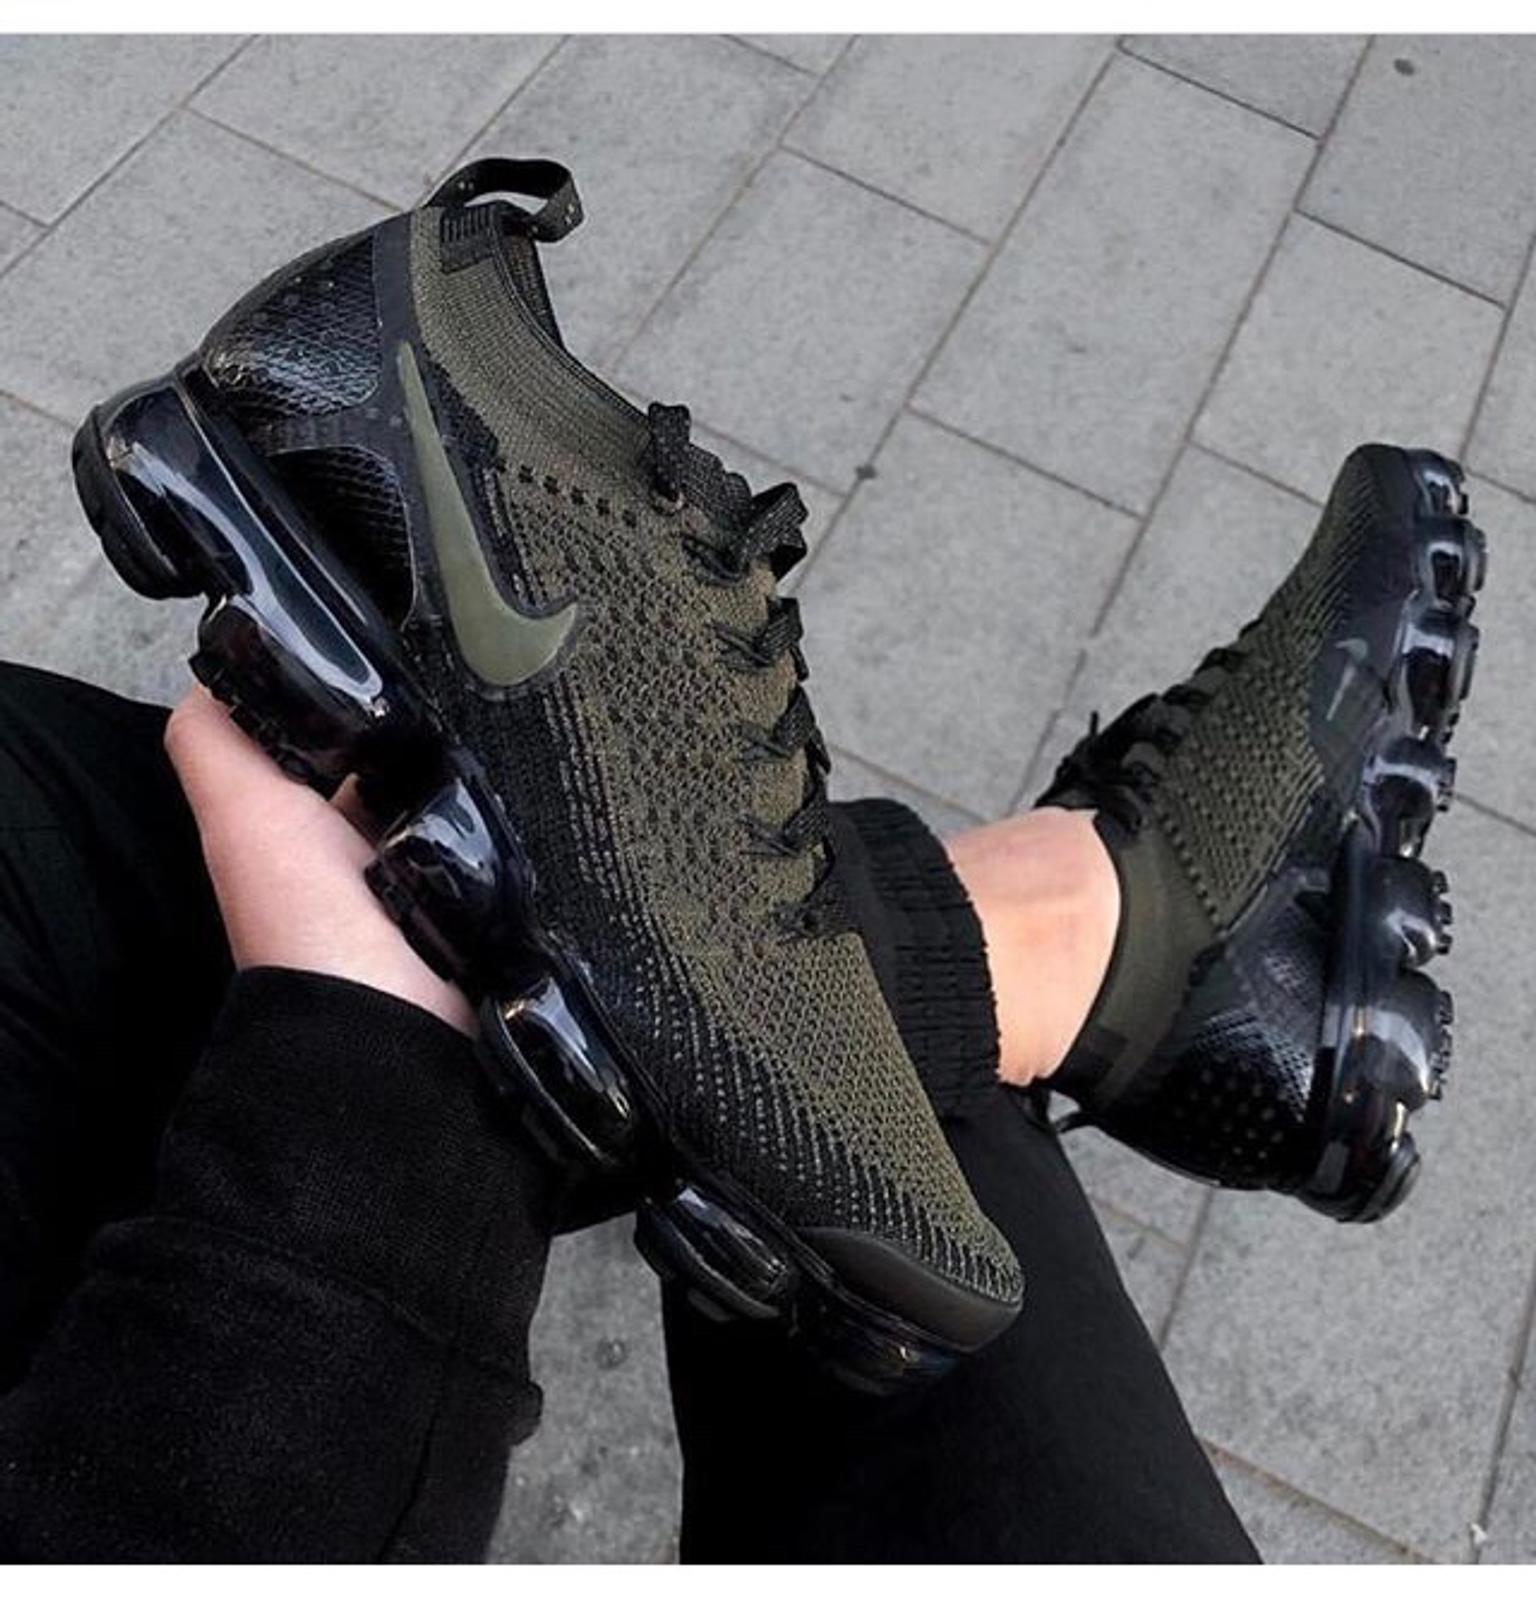 nike air vapormax limited edition